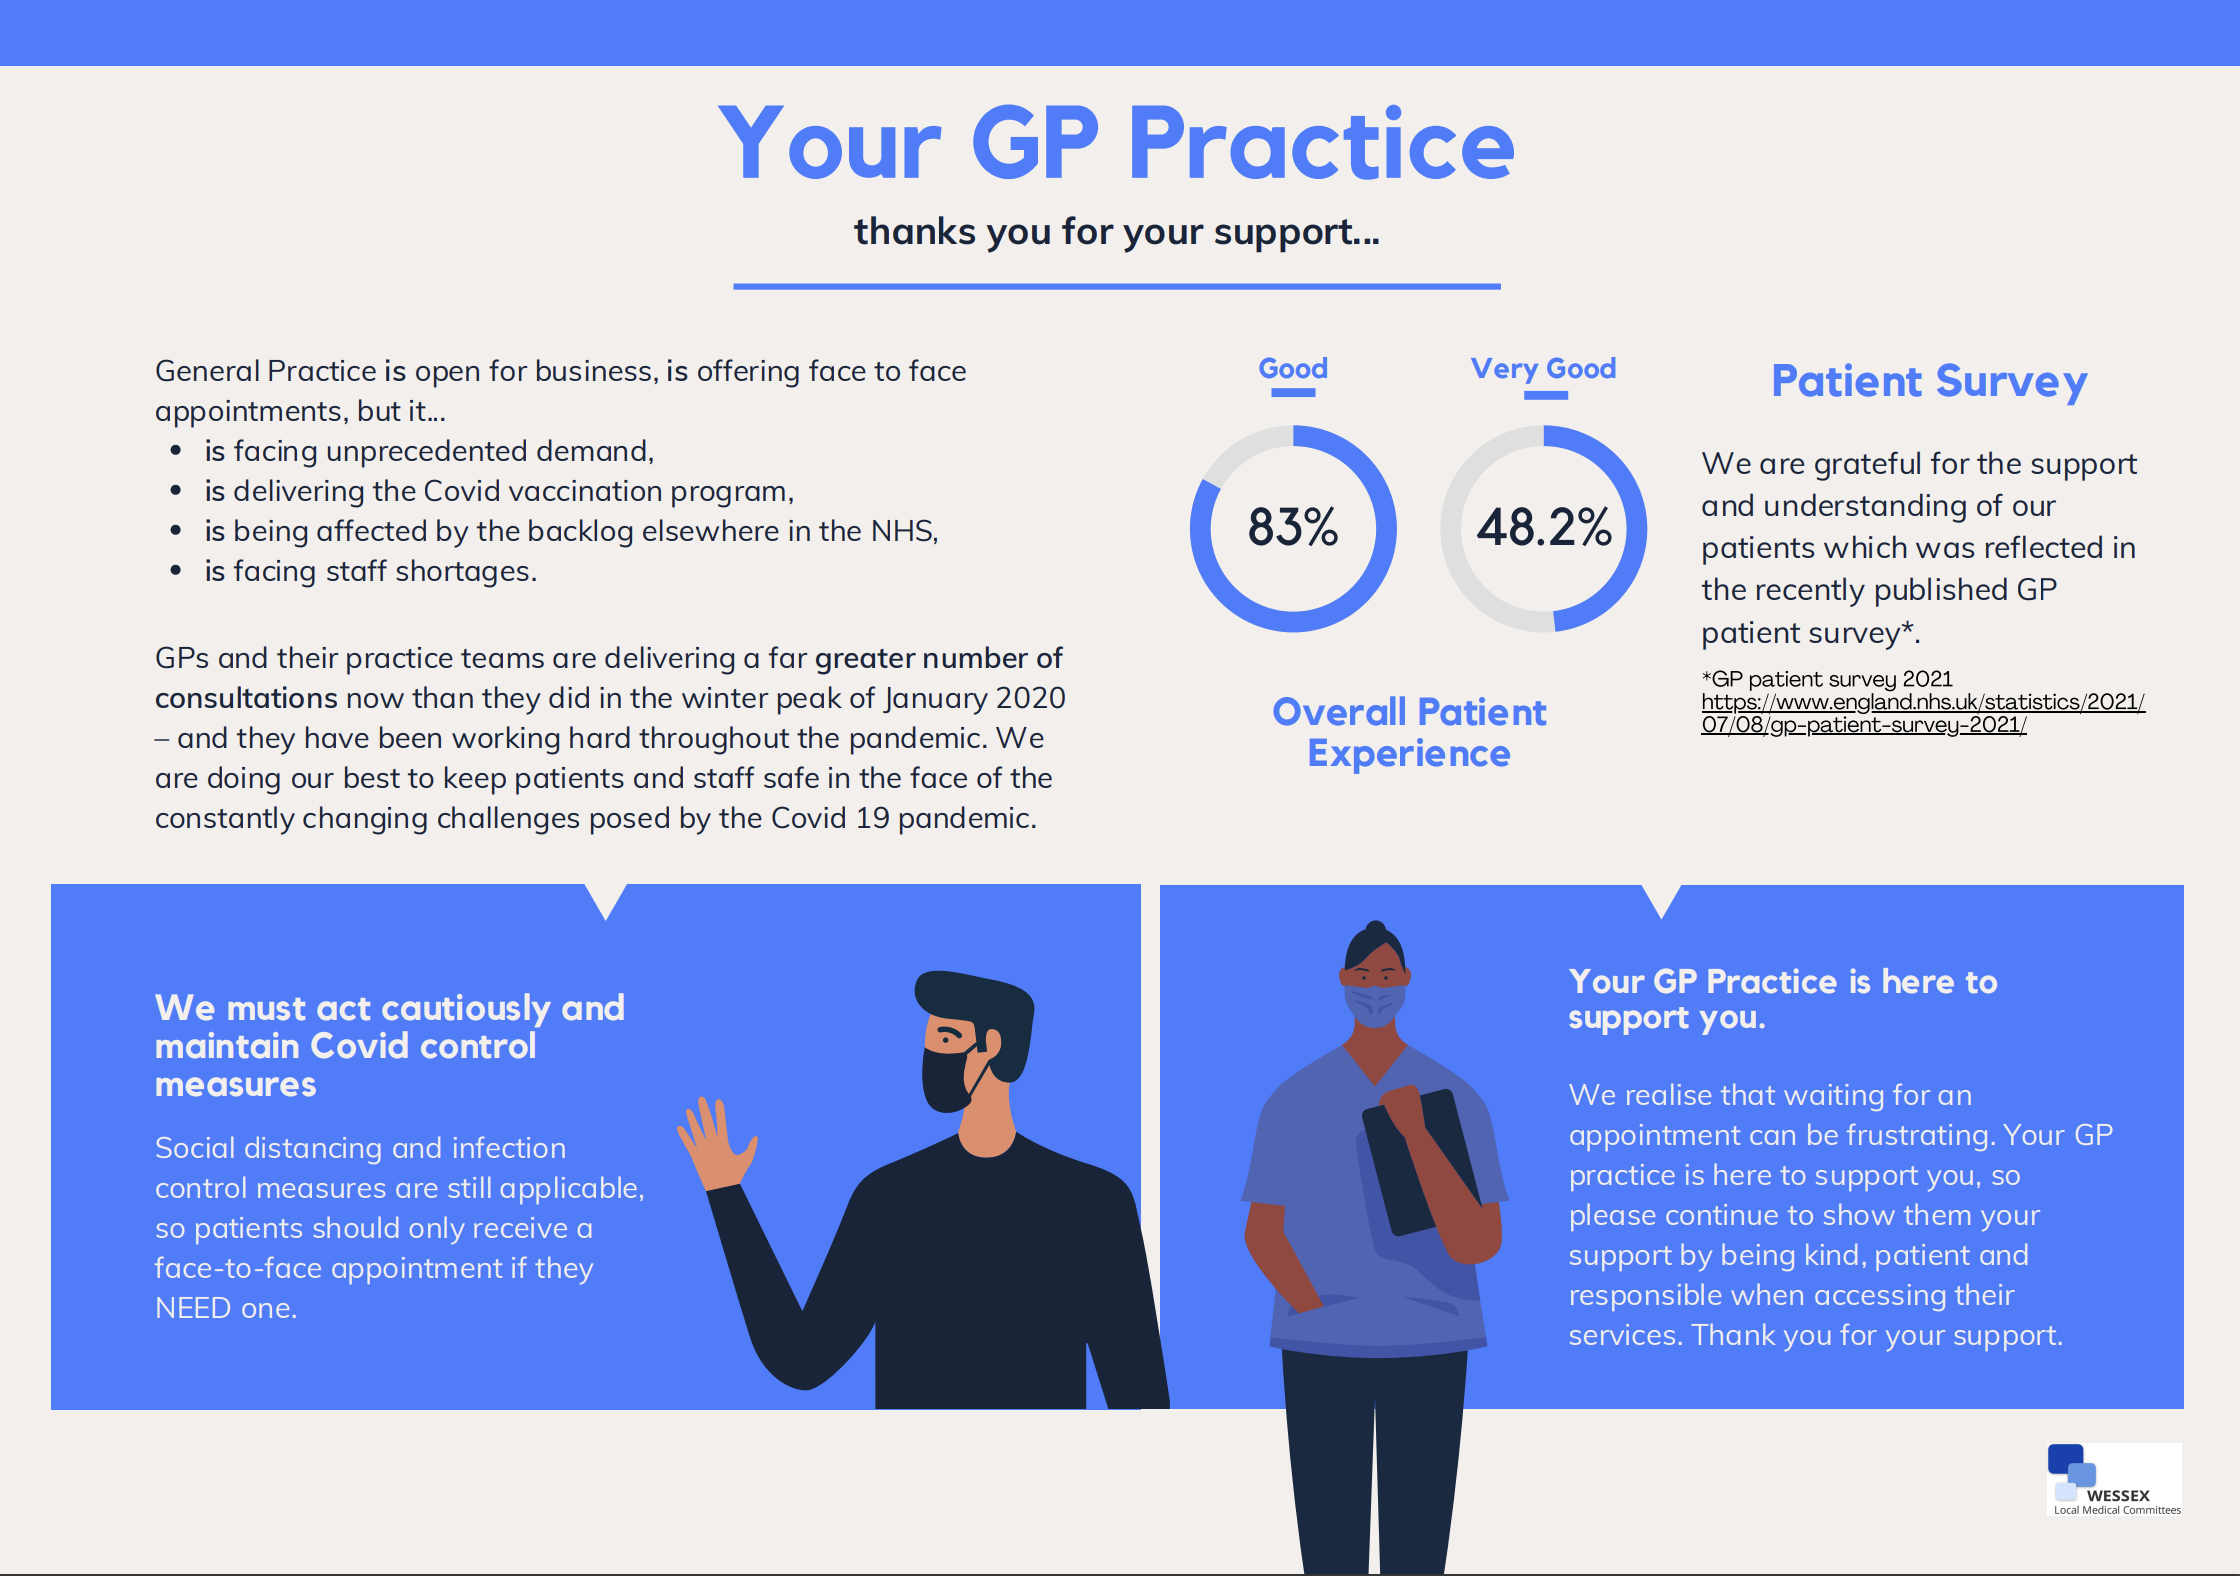 your gp practice thanks your for your support during COVID-19